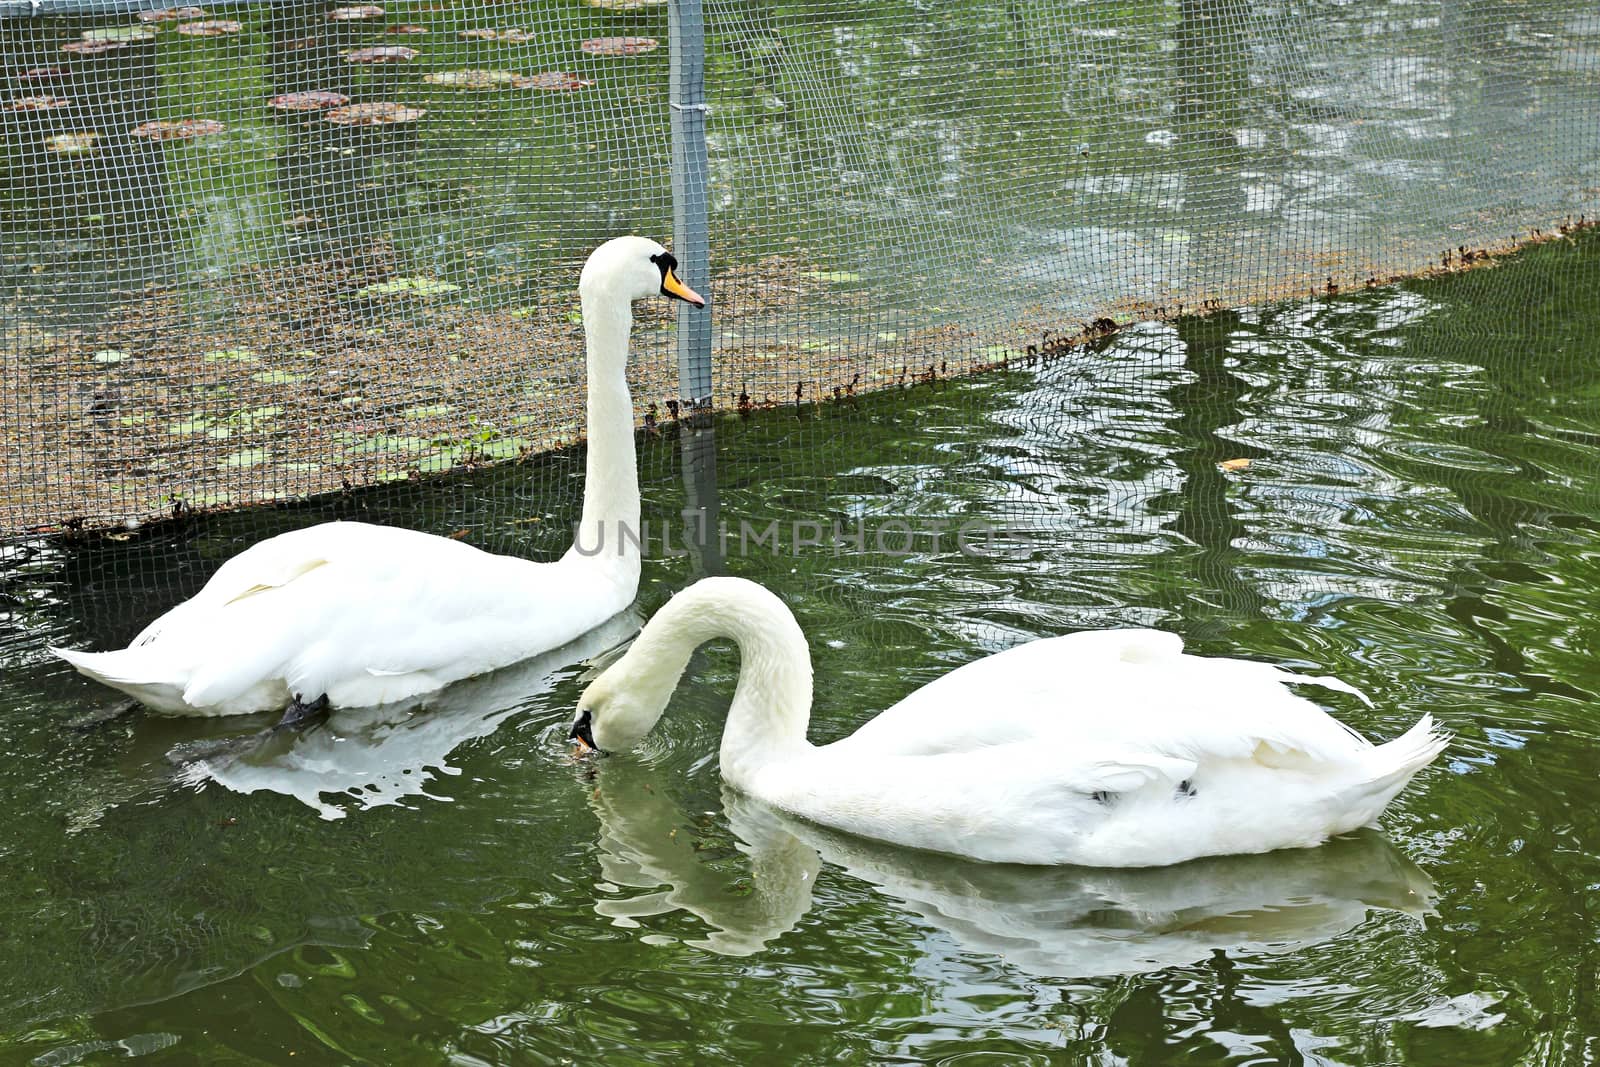 Two beautiful white swans swim in the pond of the city park.